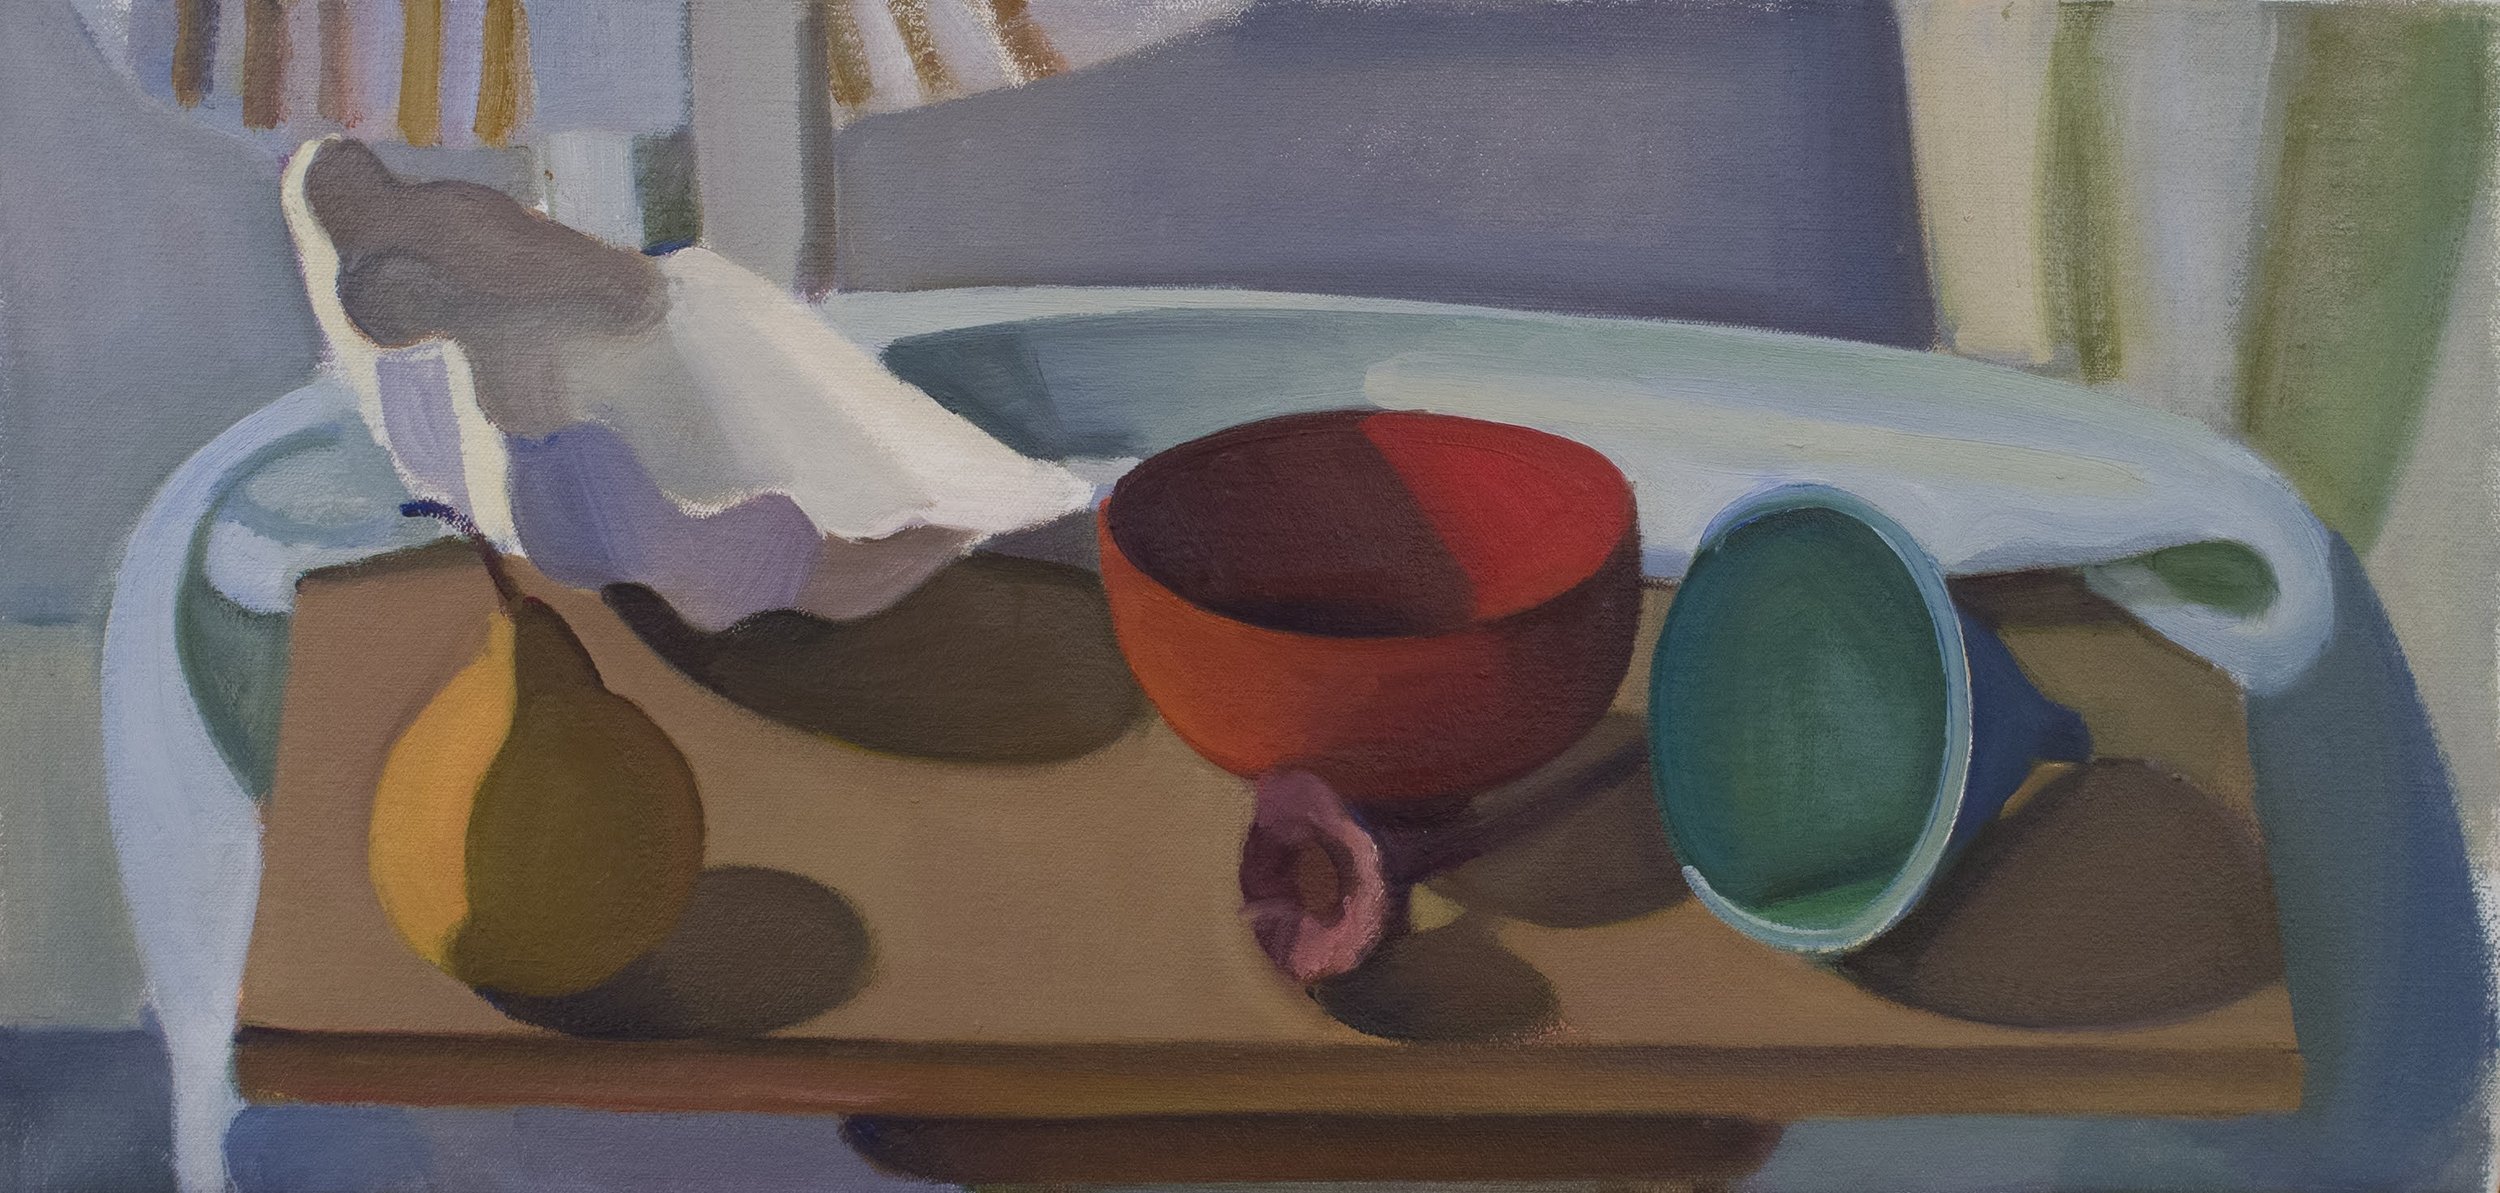   Lacquer Bowl and Funnel , 1997, oil/canvas, 11 x 23 in.  (Private collection)  